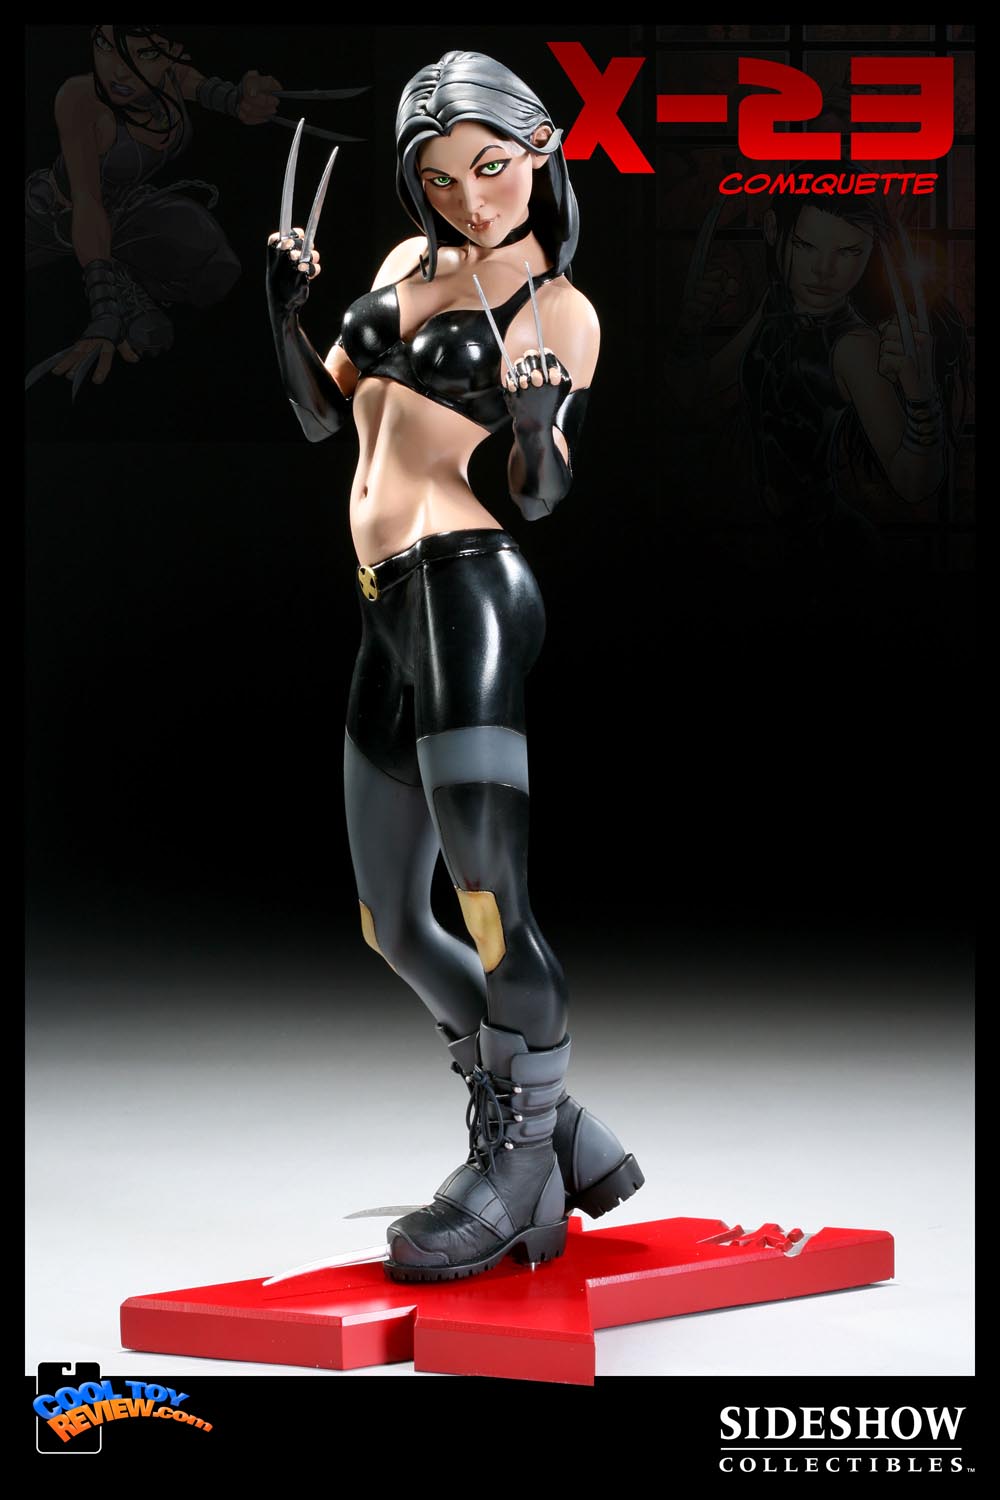 X-23 Comiquette from the Marvel Comics line by Sideshow Collectibles